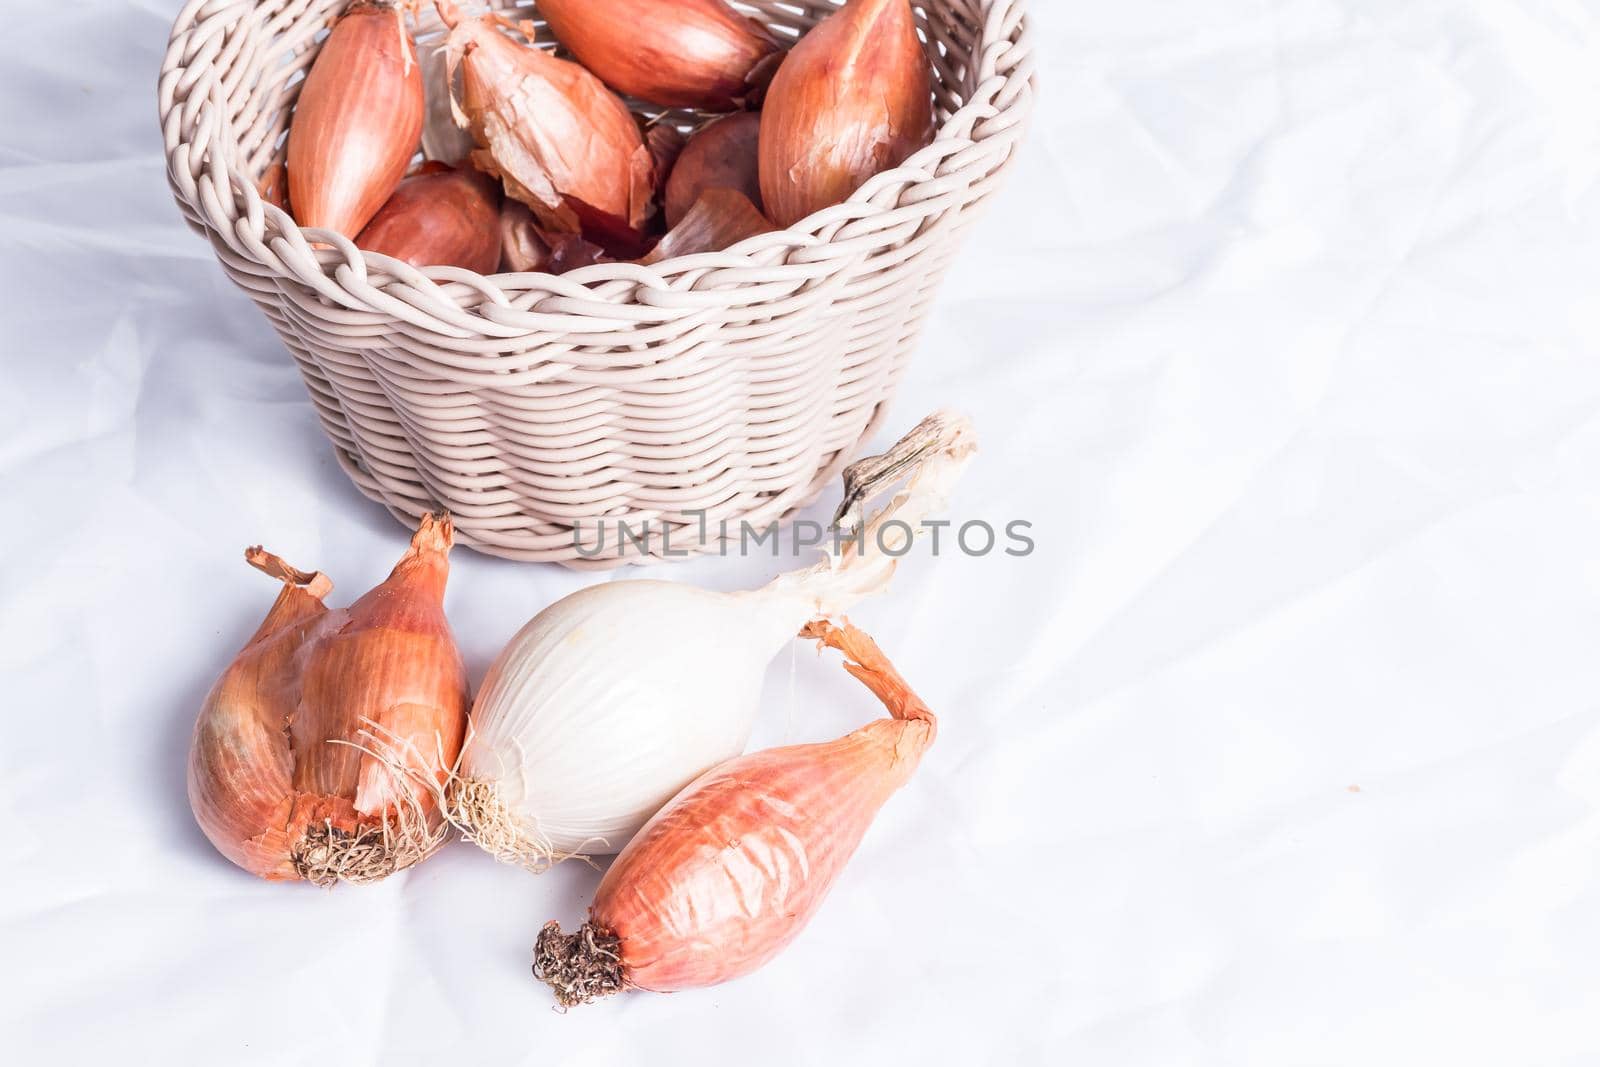 shallots in a wicker basket on a white background by AtlanticEUROSTOXX